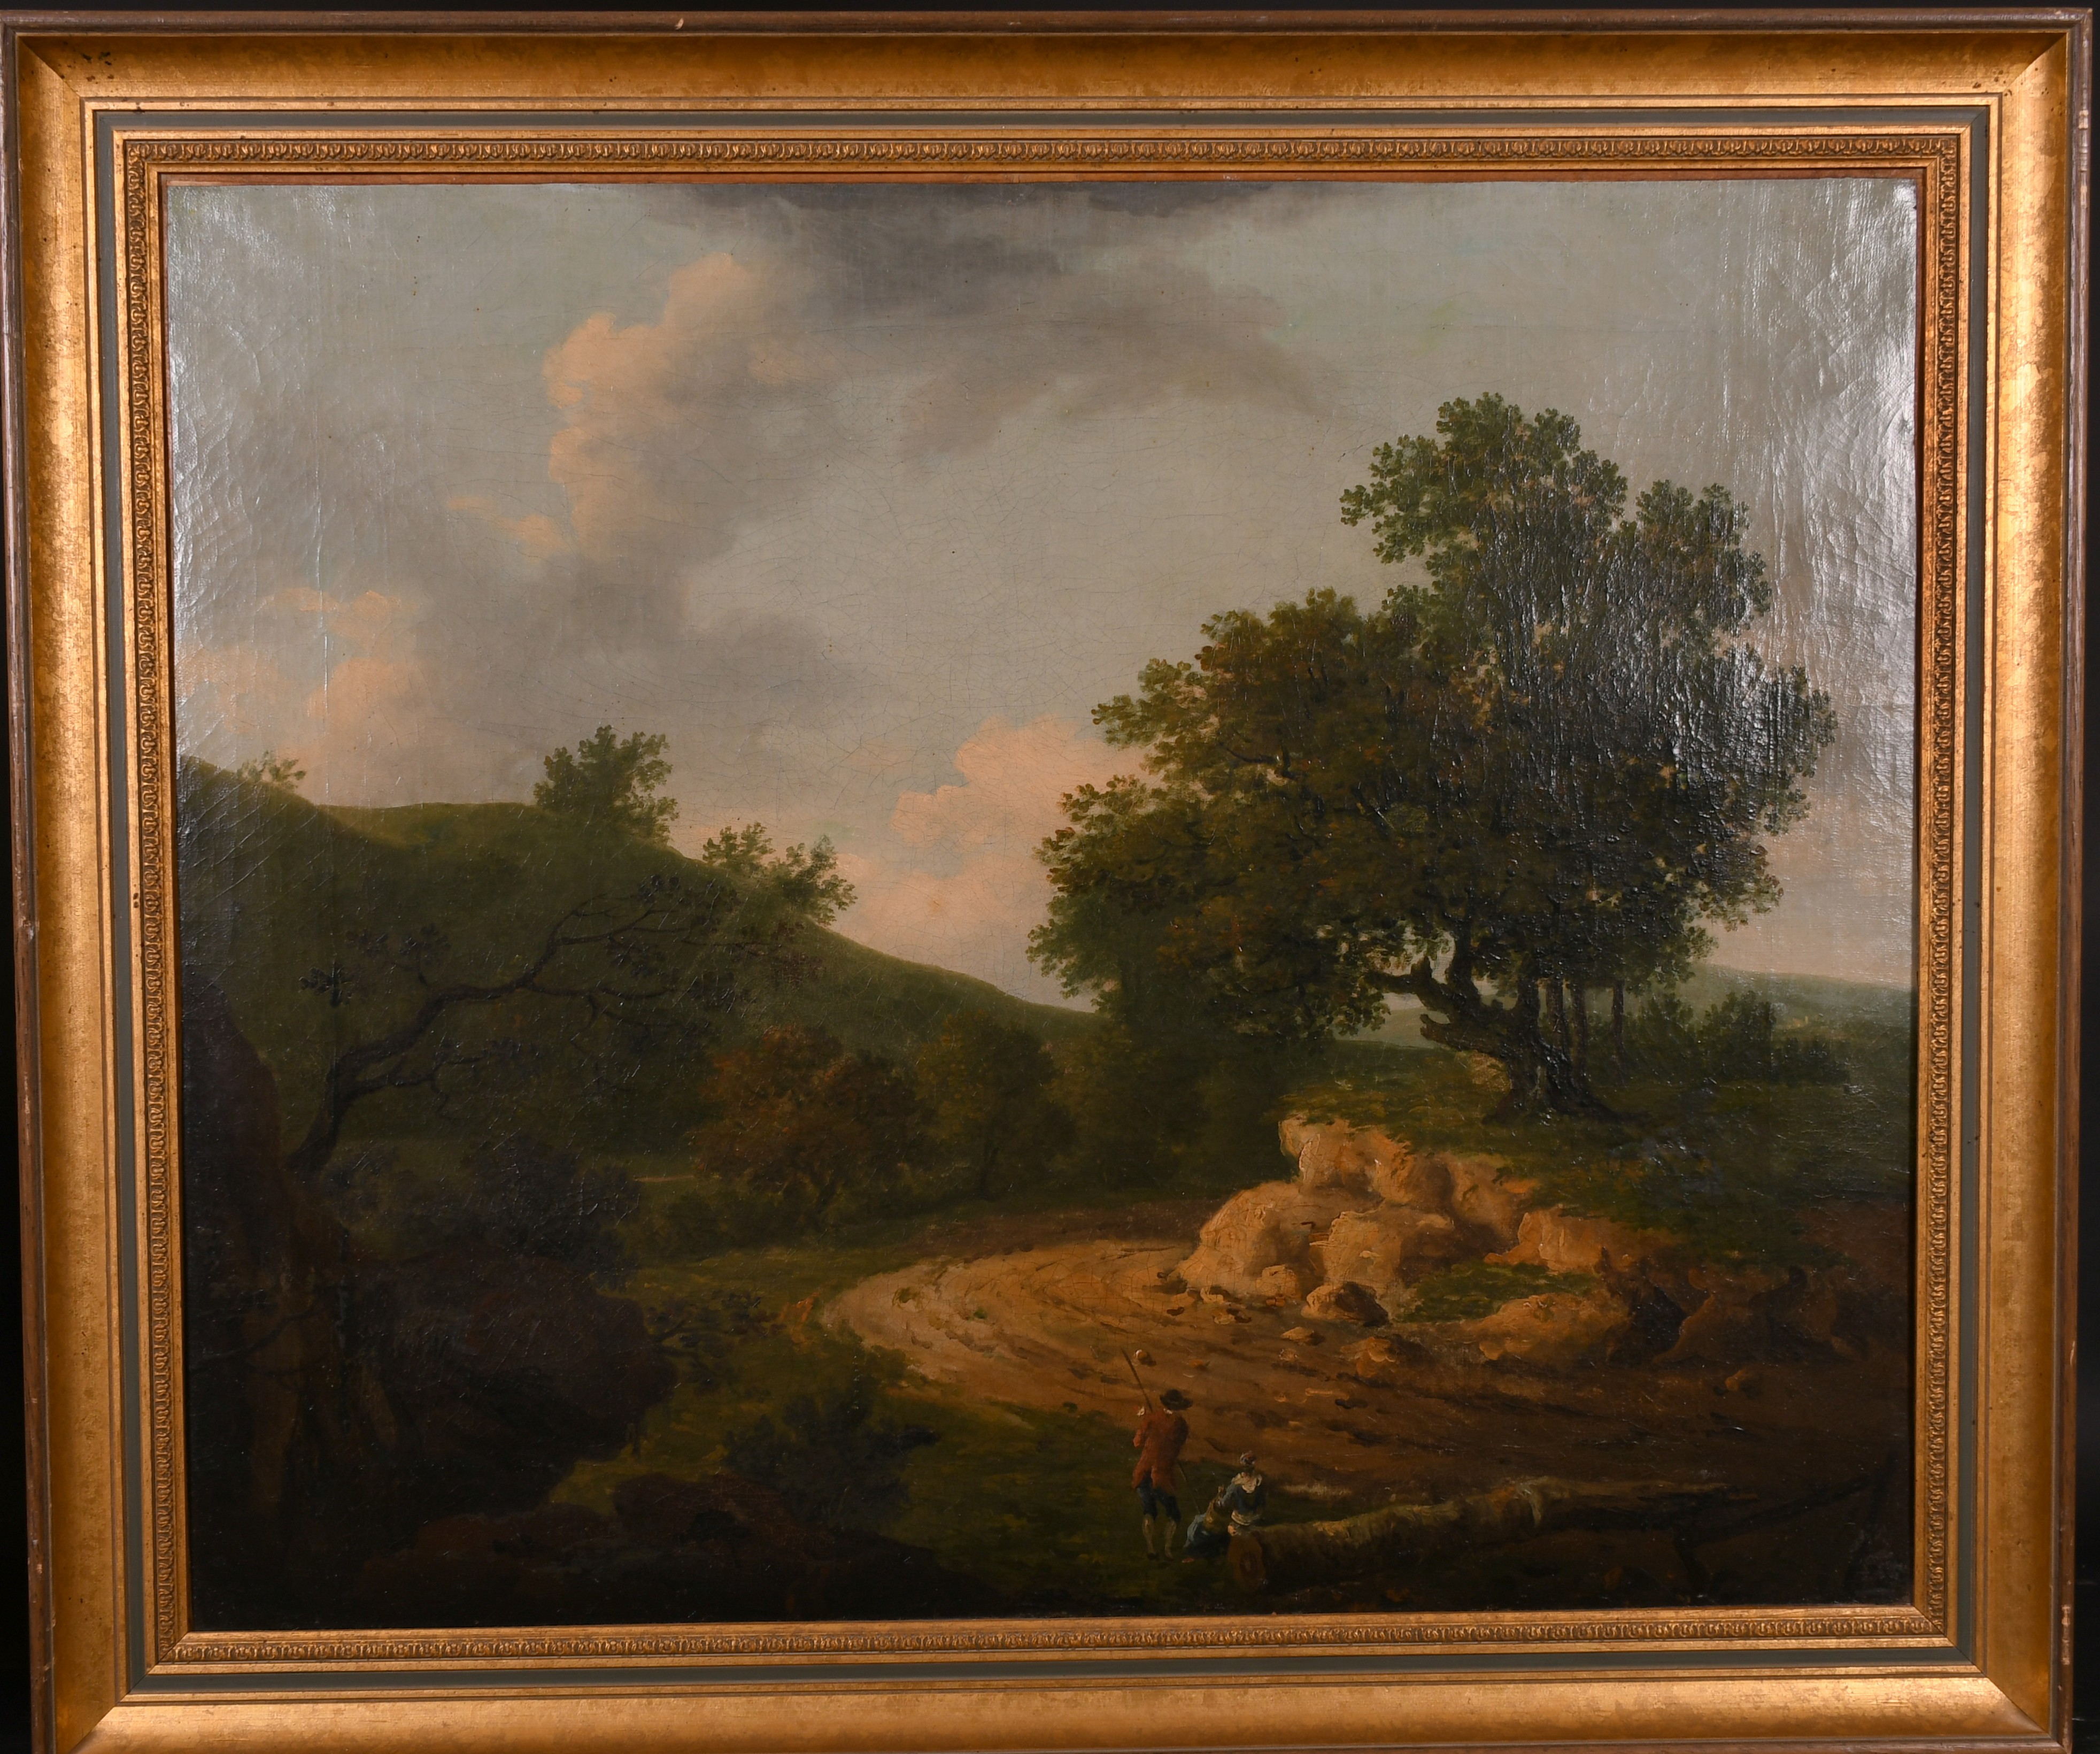 Circle of Charles Towne (1763-1840) British. A Classical Landscape with Figures in the foreground, - Image 2 of 3